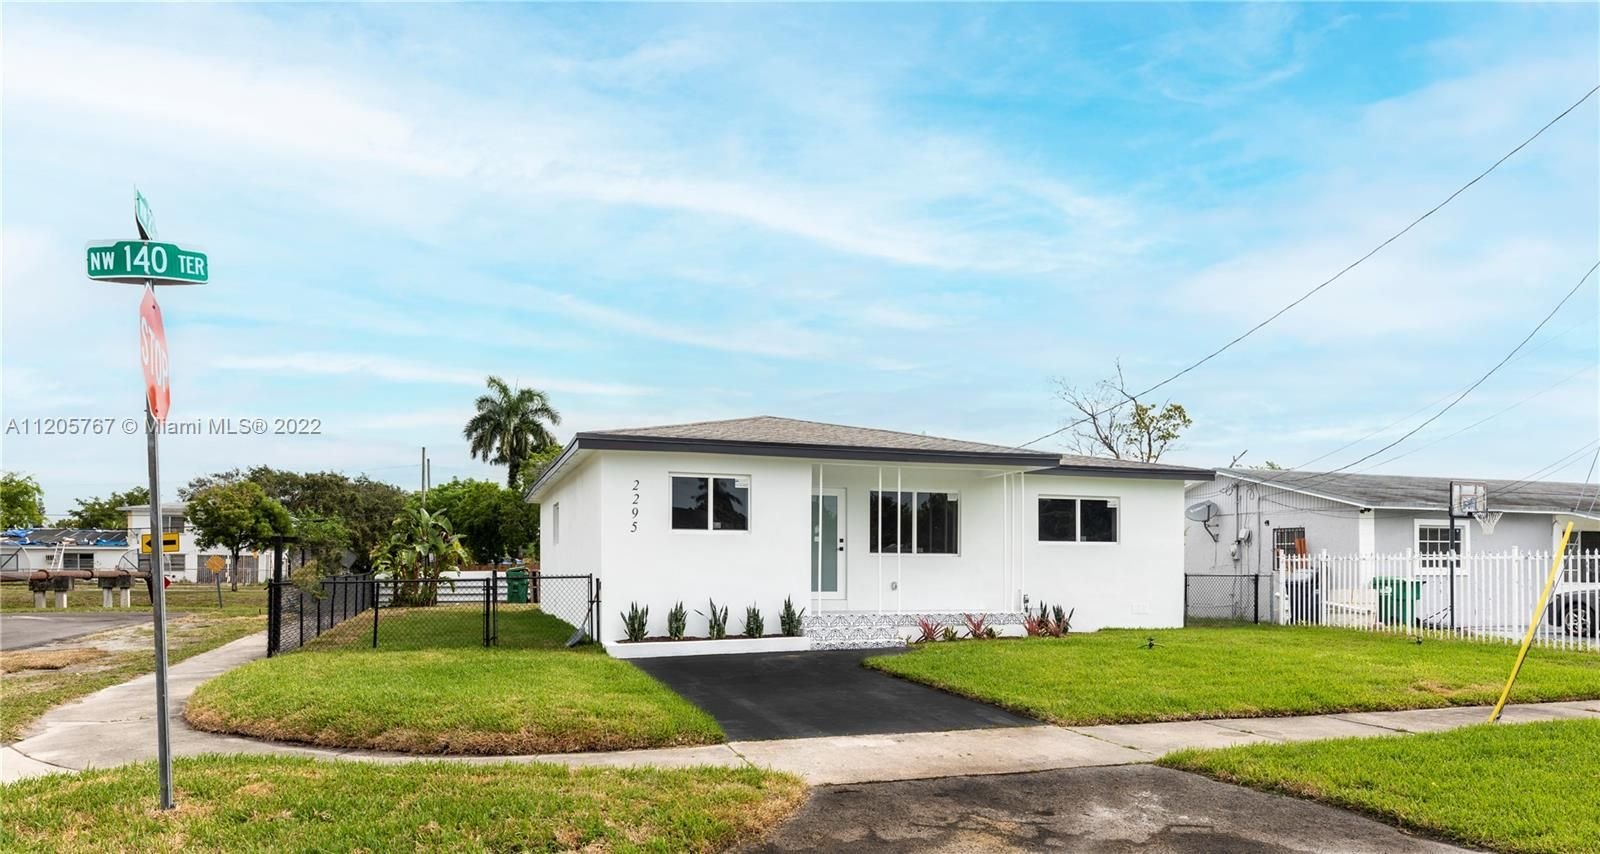 Real estate property located at 2295 140th Ter, Miami-Dade County, Opa-locka, FL